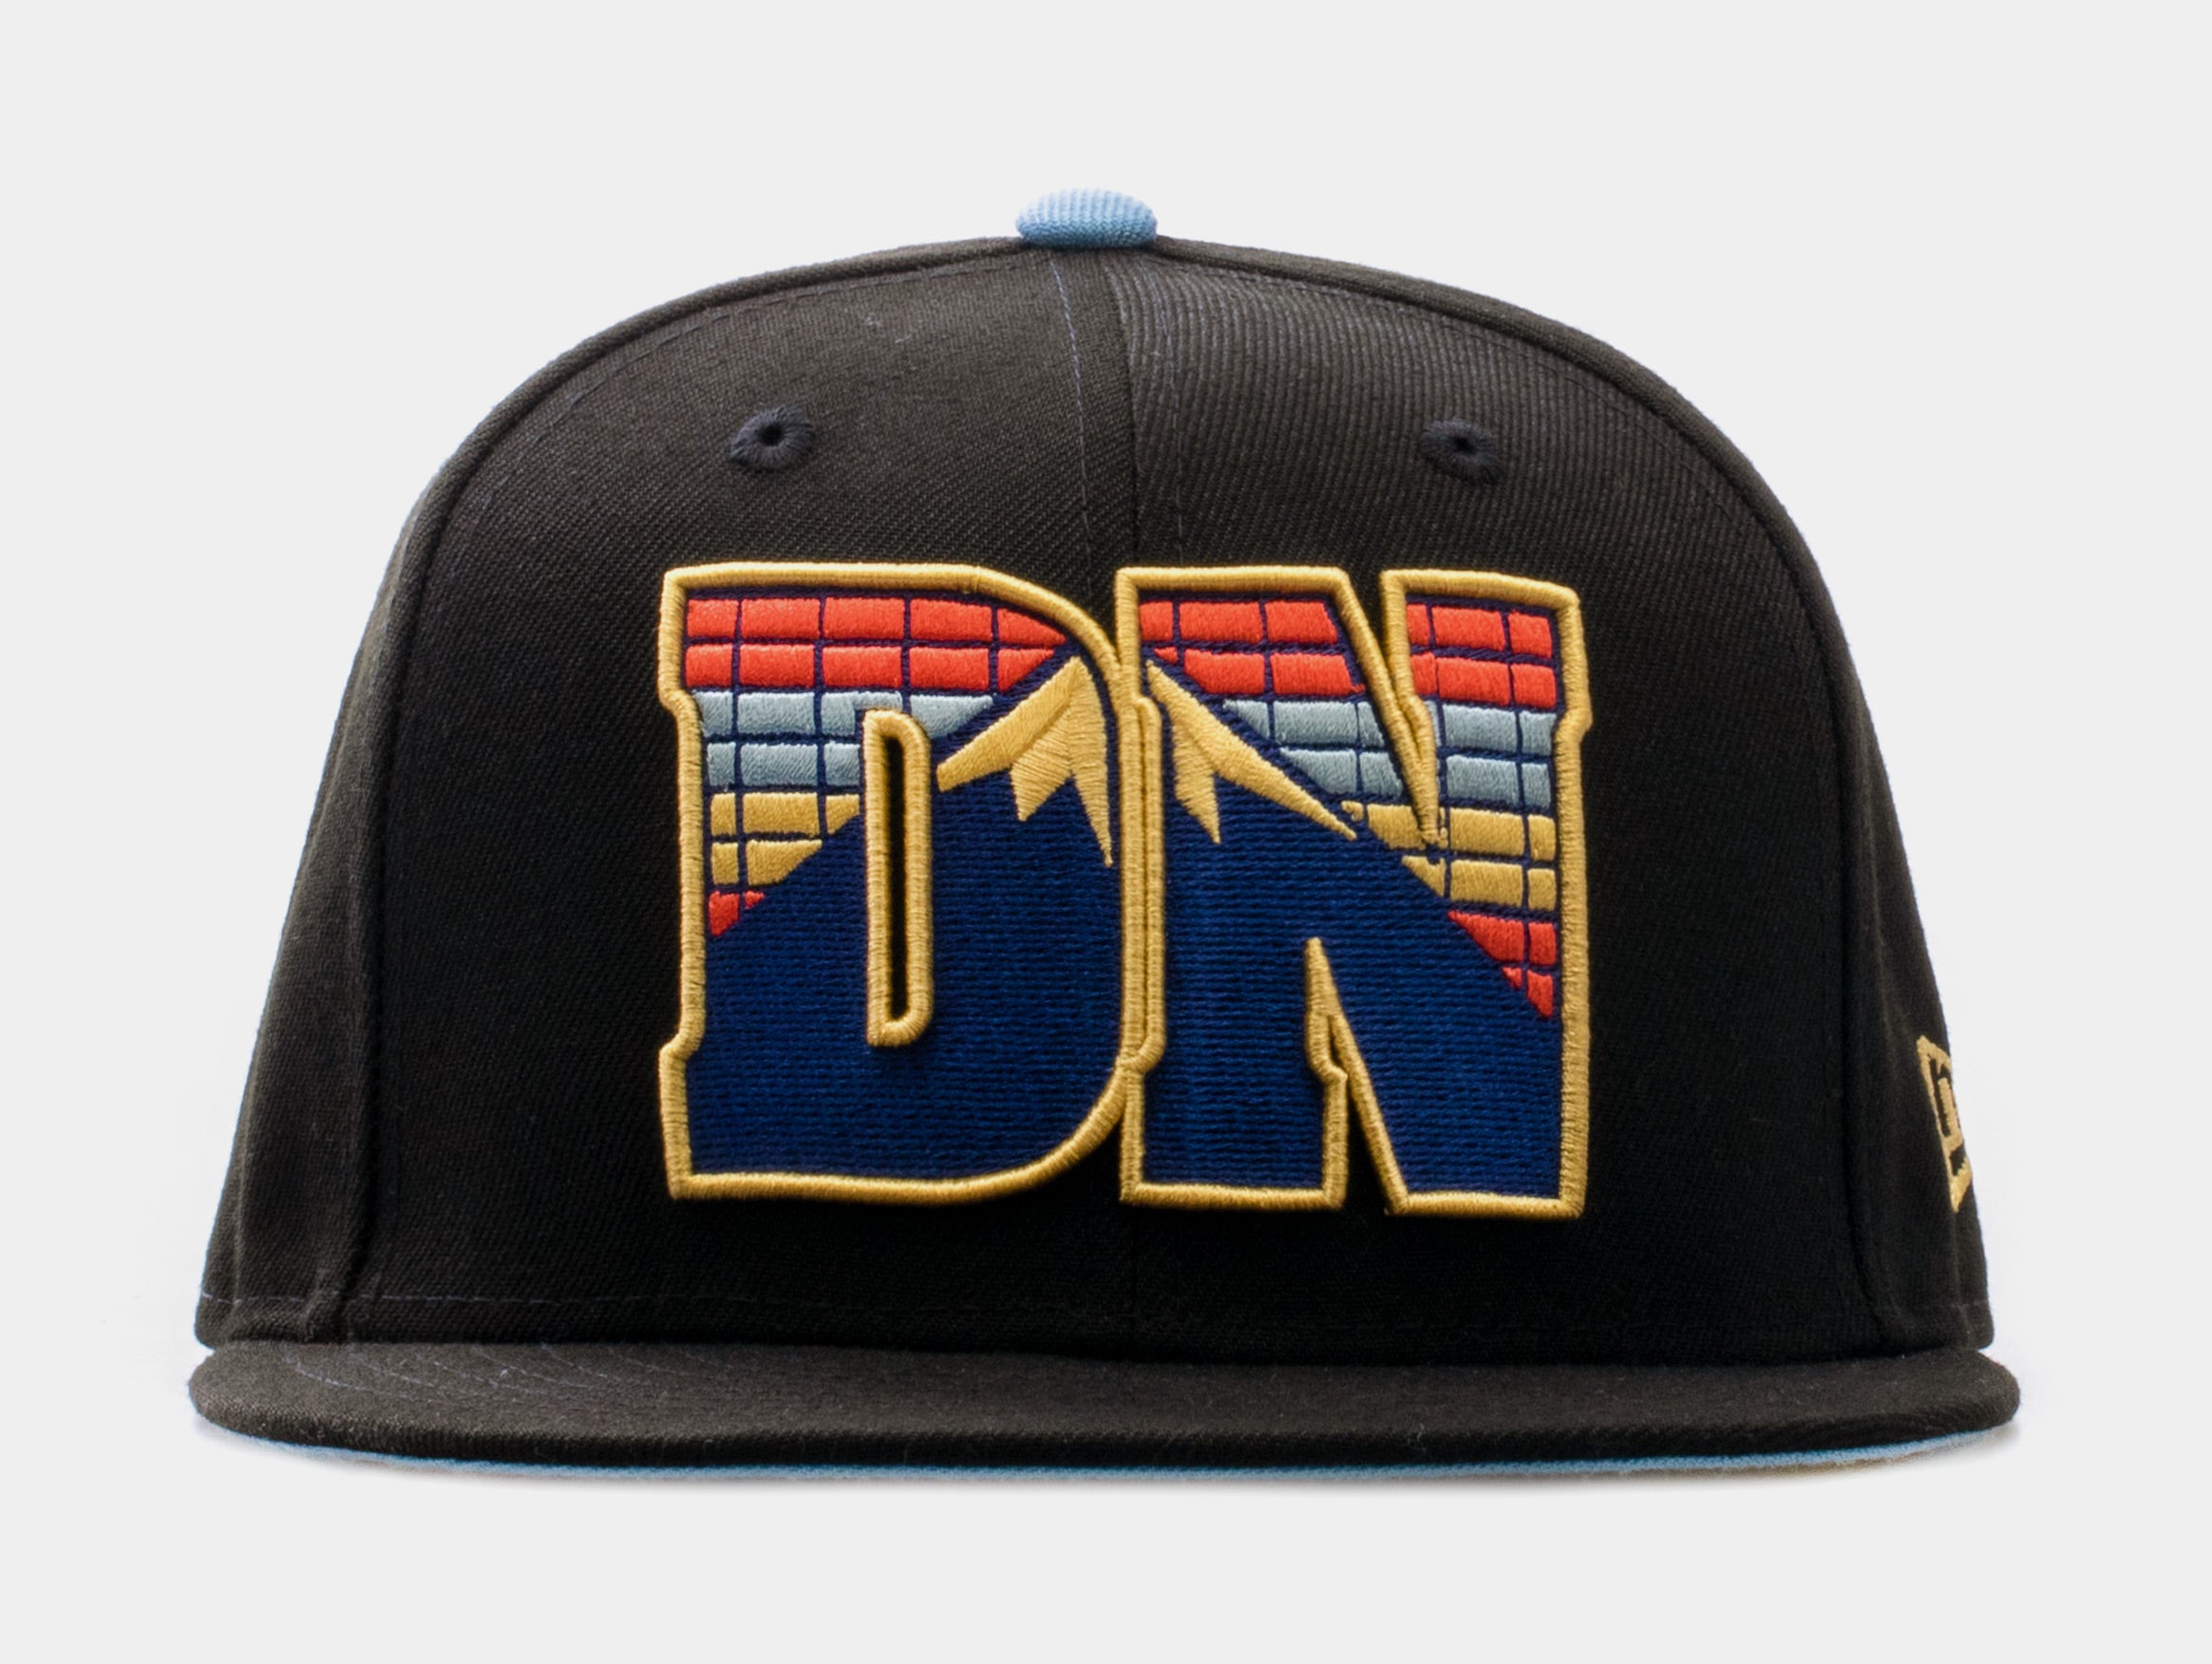 RARE Denver Nuggets NBA New Era 59Fifty Official Fitted Hat/Cap Size 7.5  NWOT